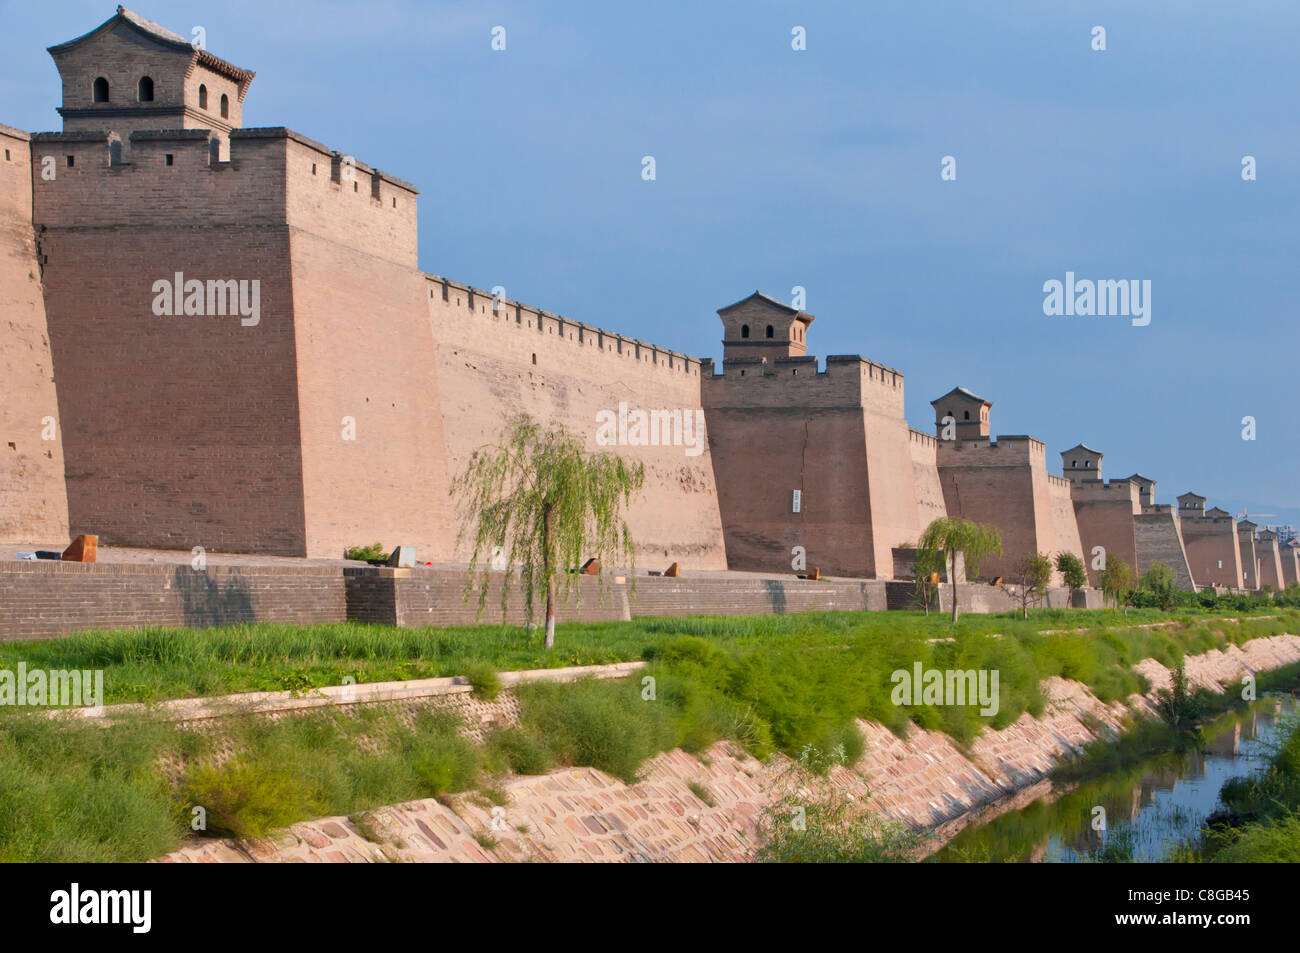 Pingyao, renowned for its well-preserved ancient city wall, UNESCO World Heritage Site, Shanxi, China Stock Photo